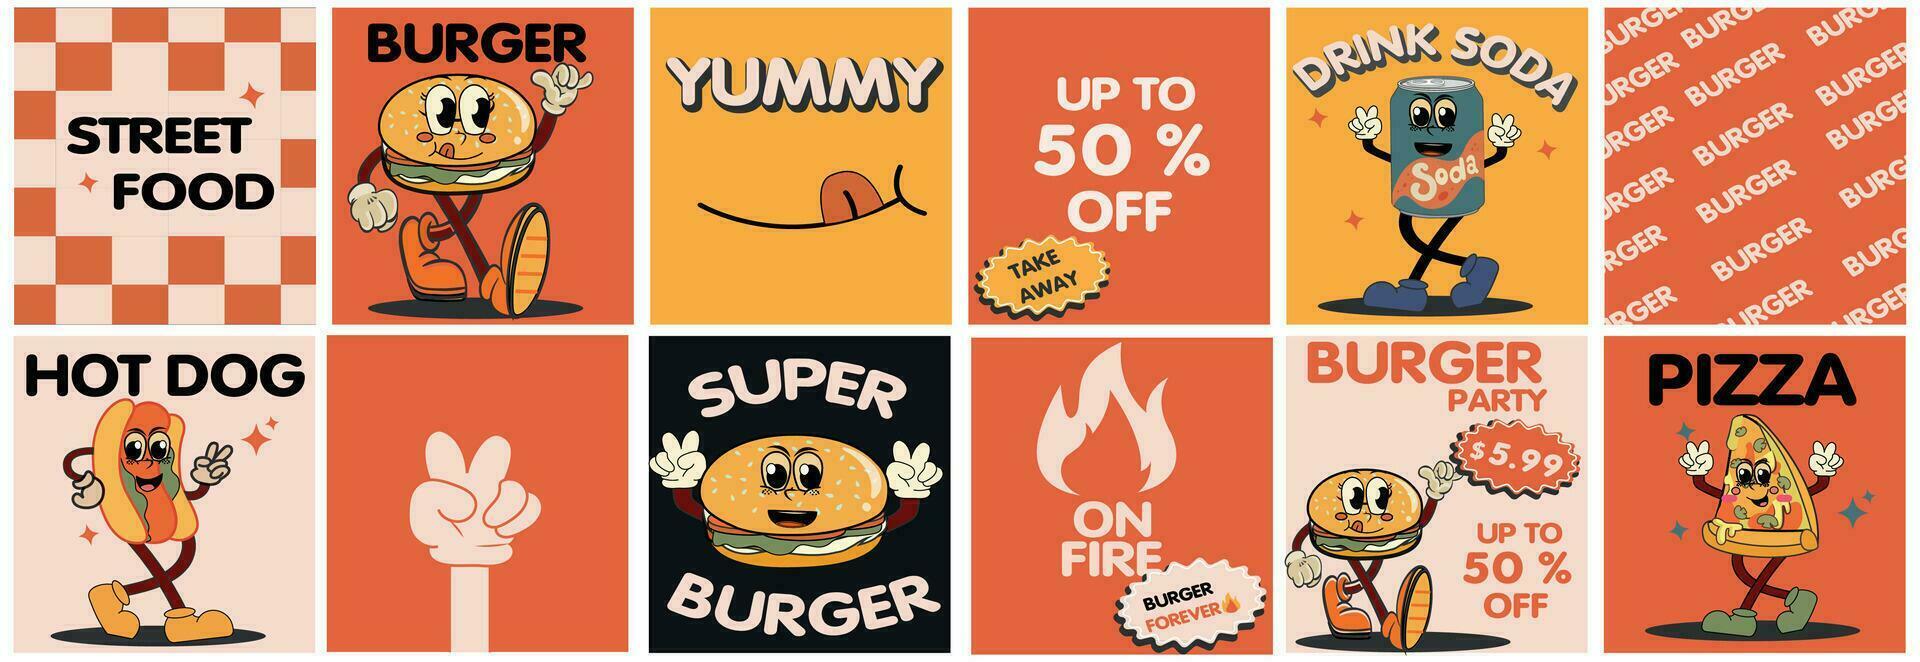 Burger retro cartoon fast food posters and cards. Comic character slogan quote and other elements for burger,Hot dog bar restaurant. Social media templates stories posts. Groovy funky vector